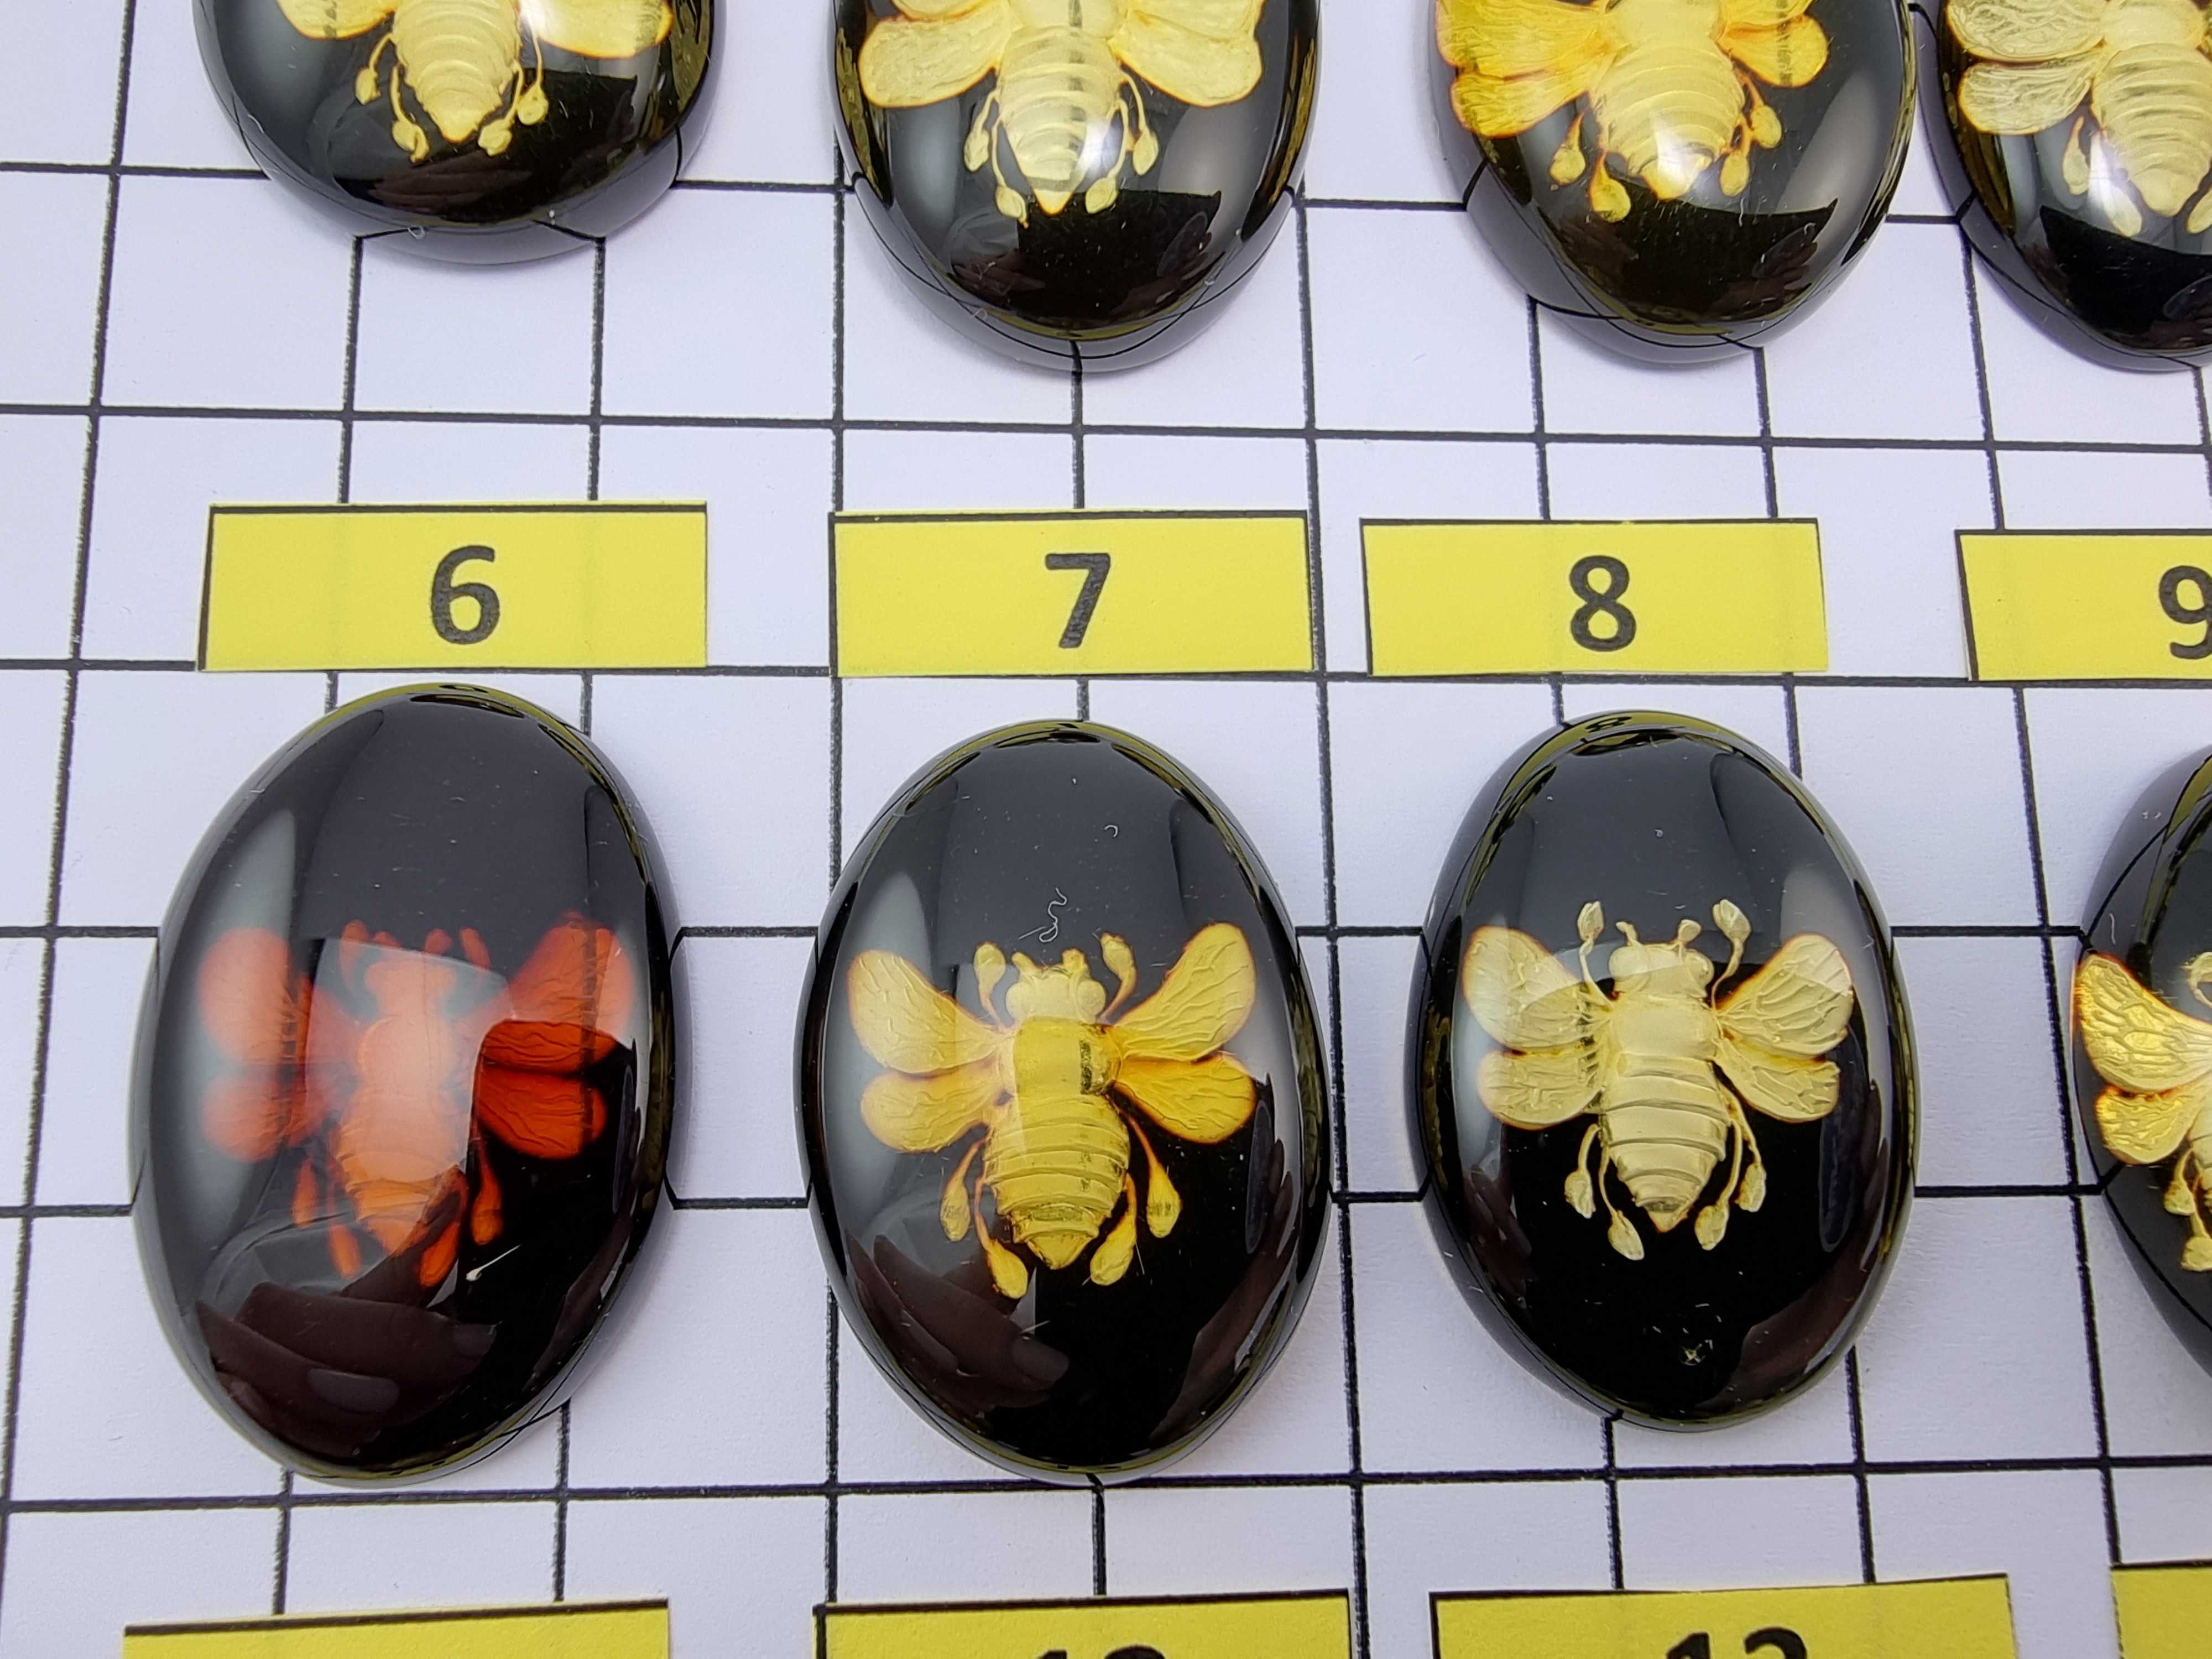 Cherry Amber Engraved Bee Oval Shape Cabochons